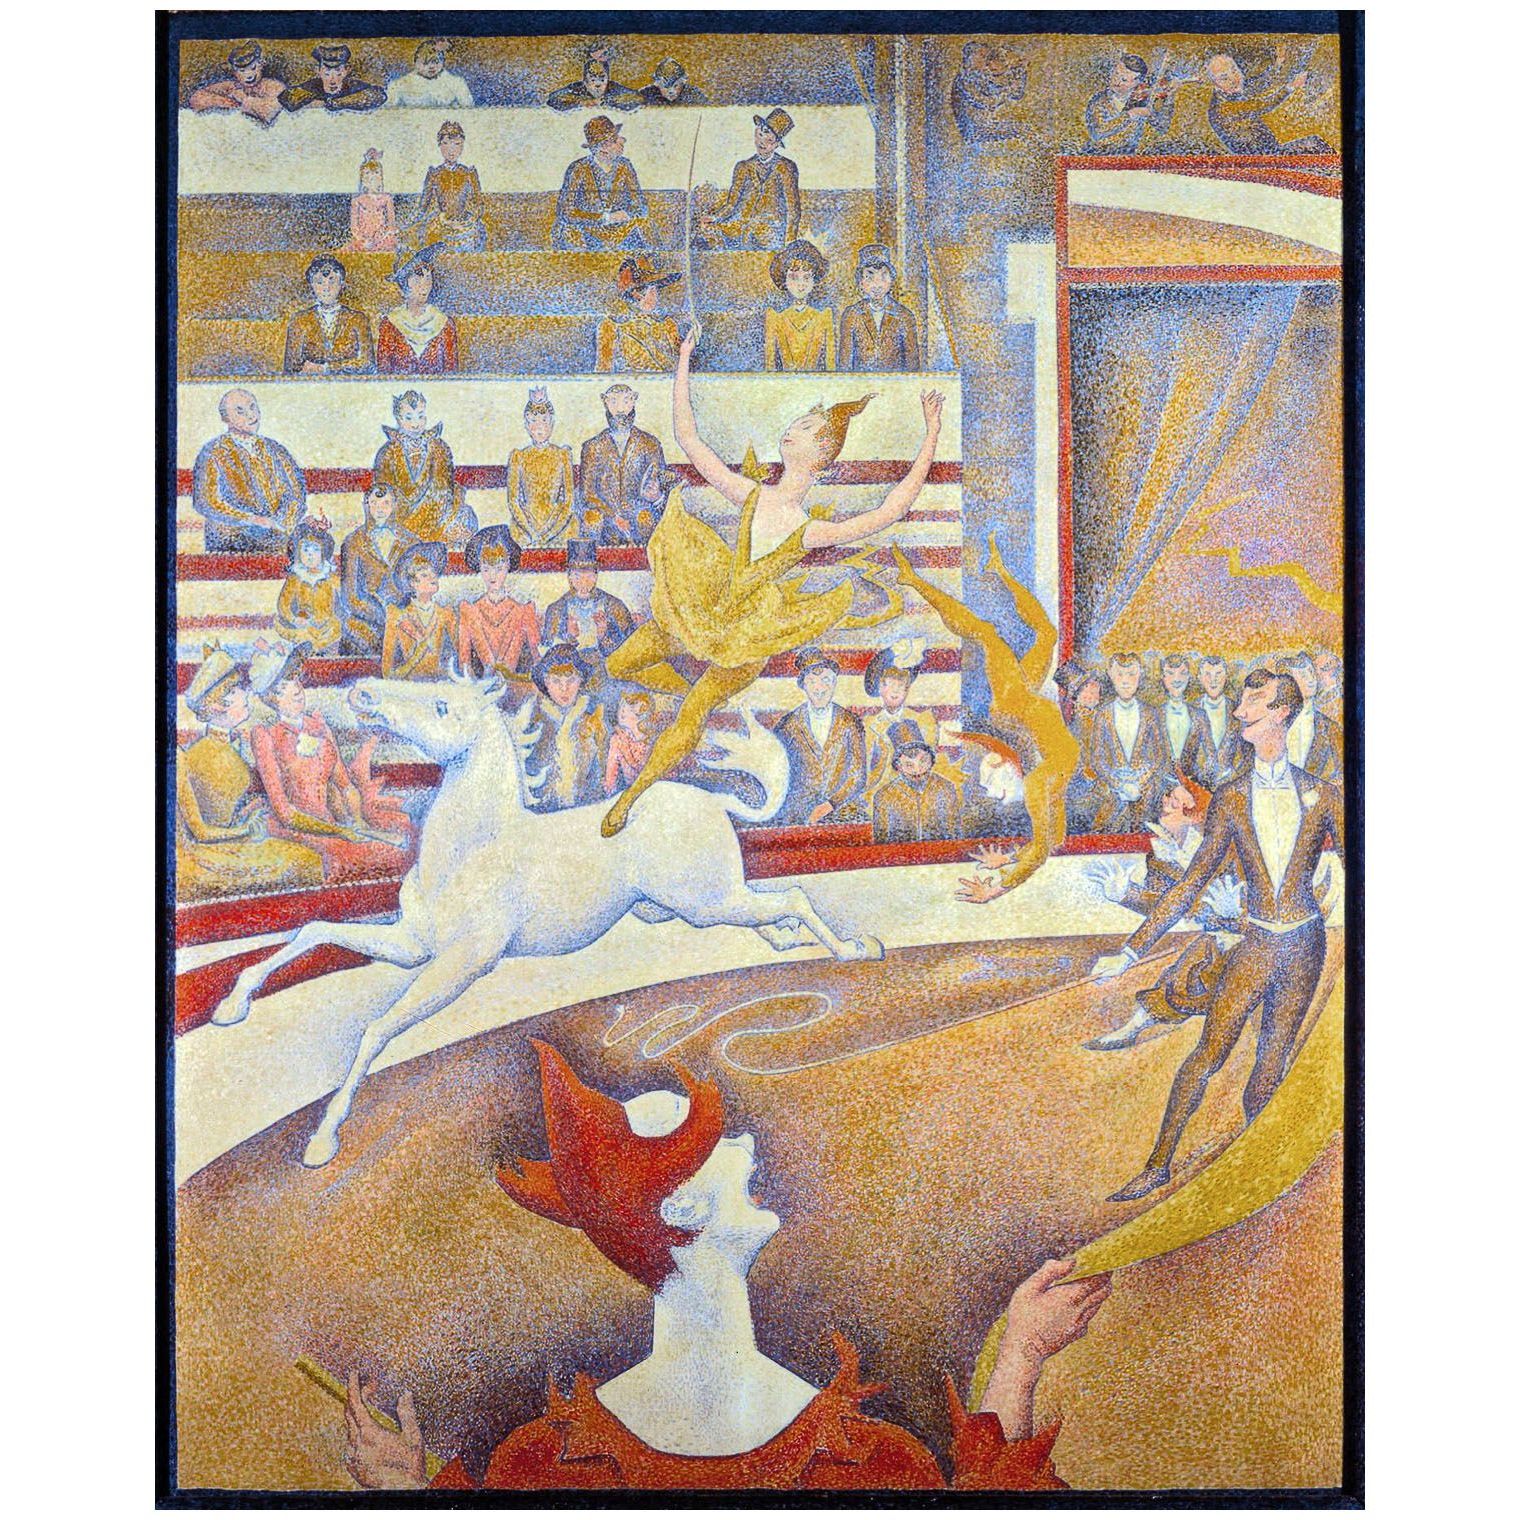 Georges Seurat. Le Cirque. 1891. Musee d’Orsay